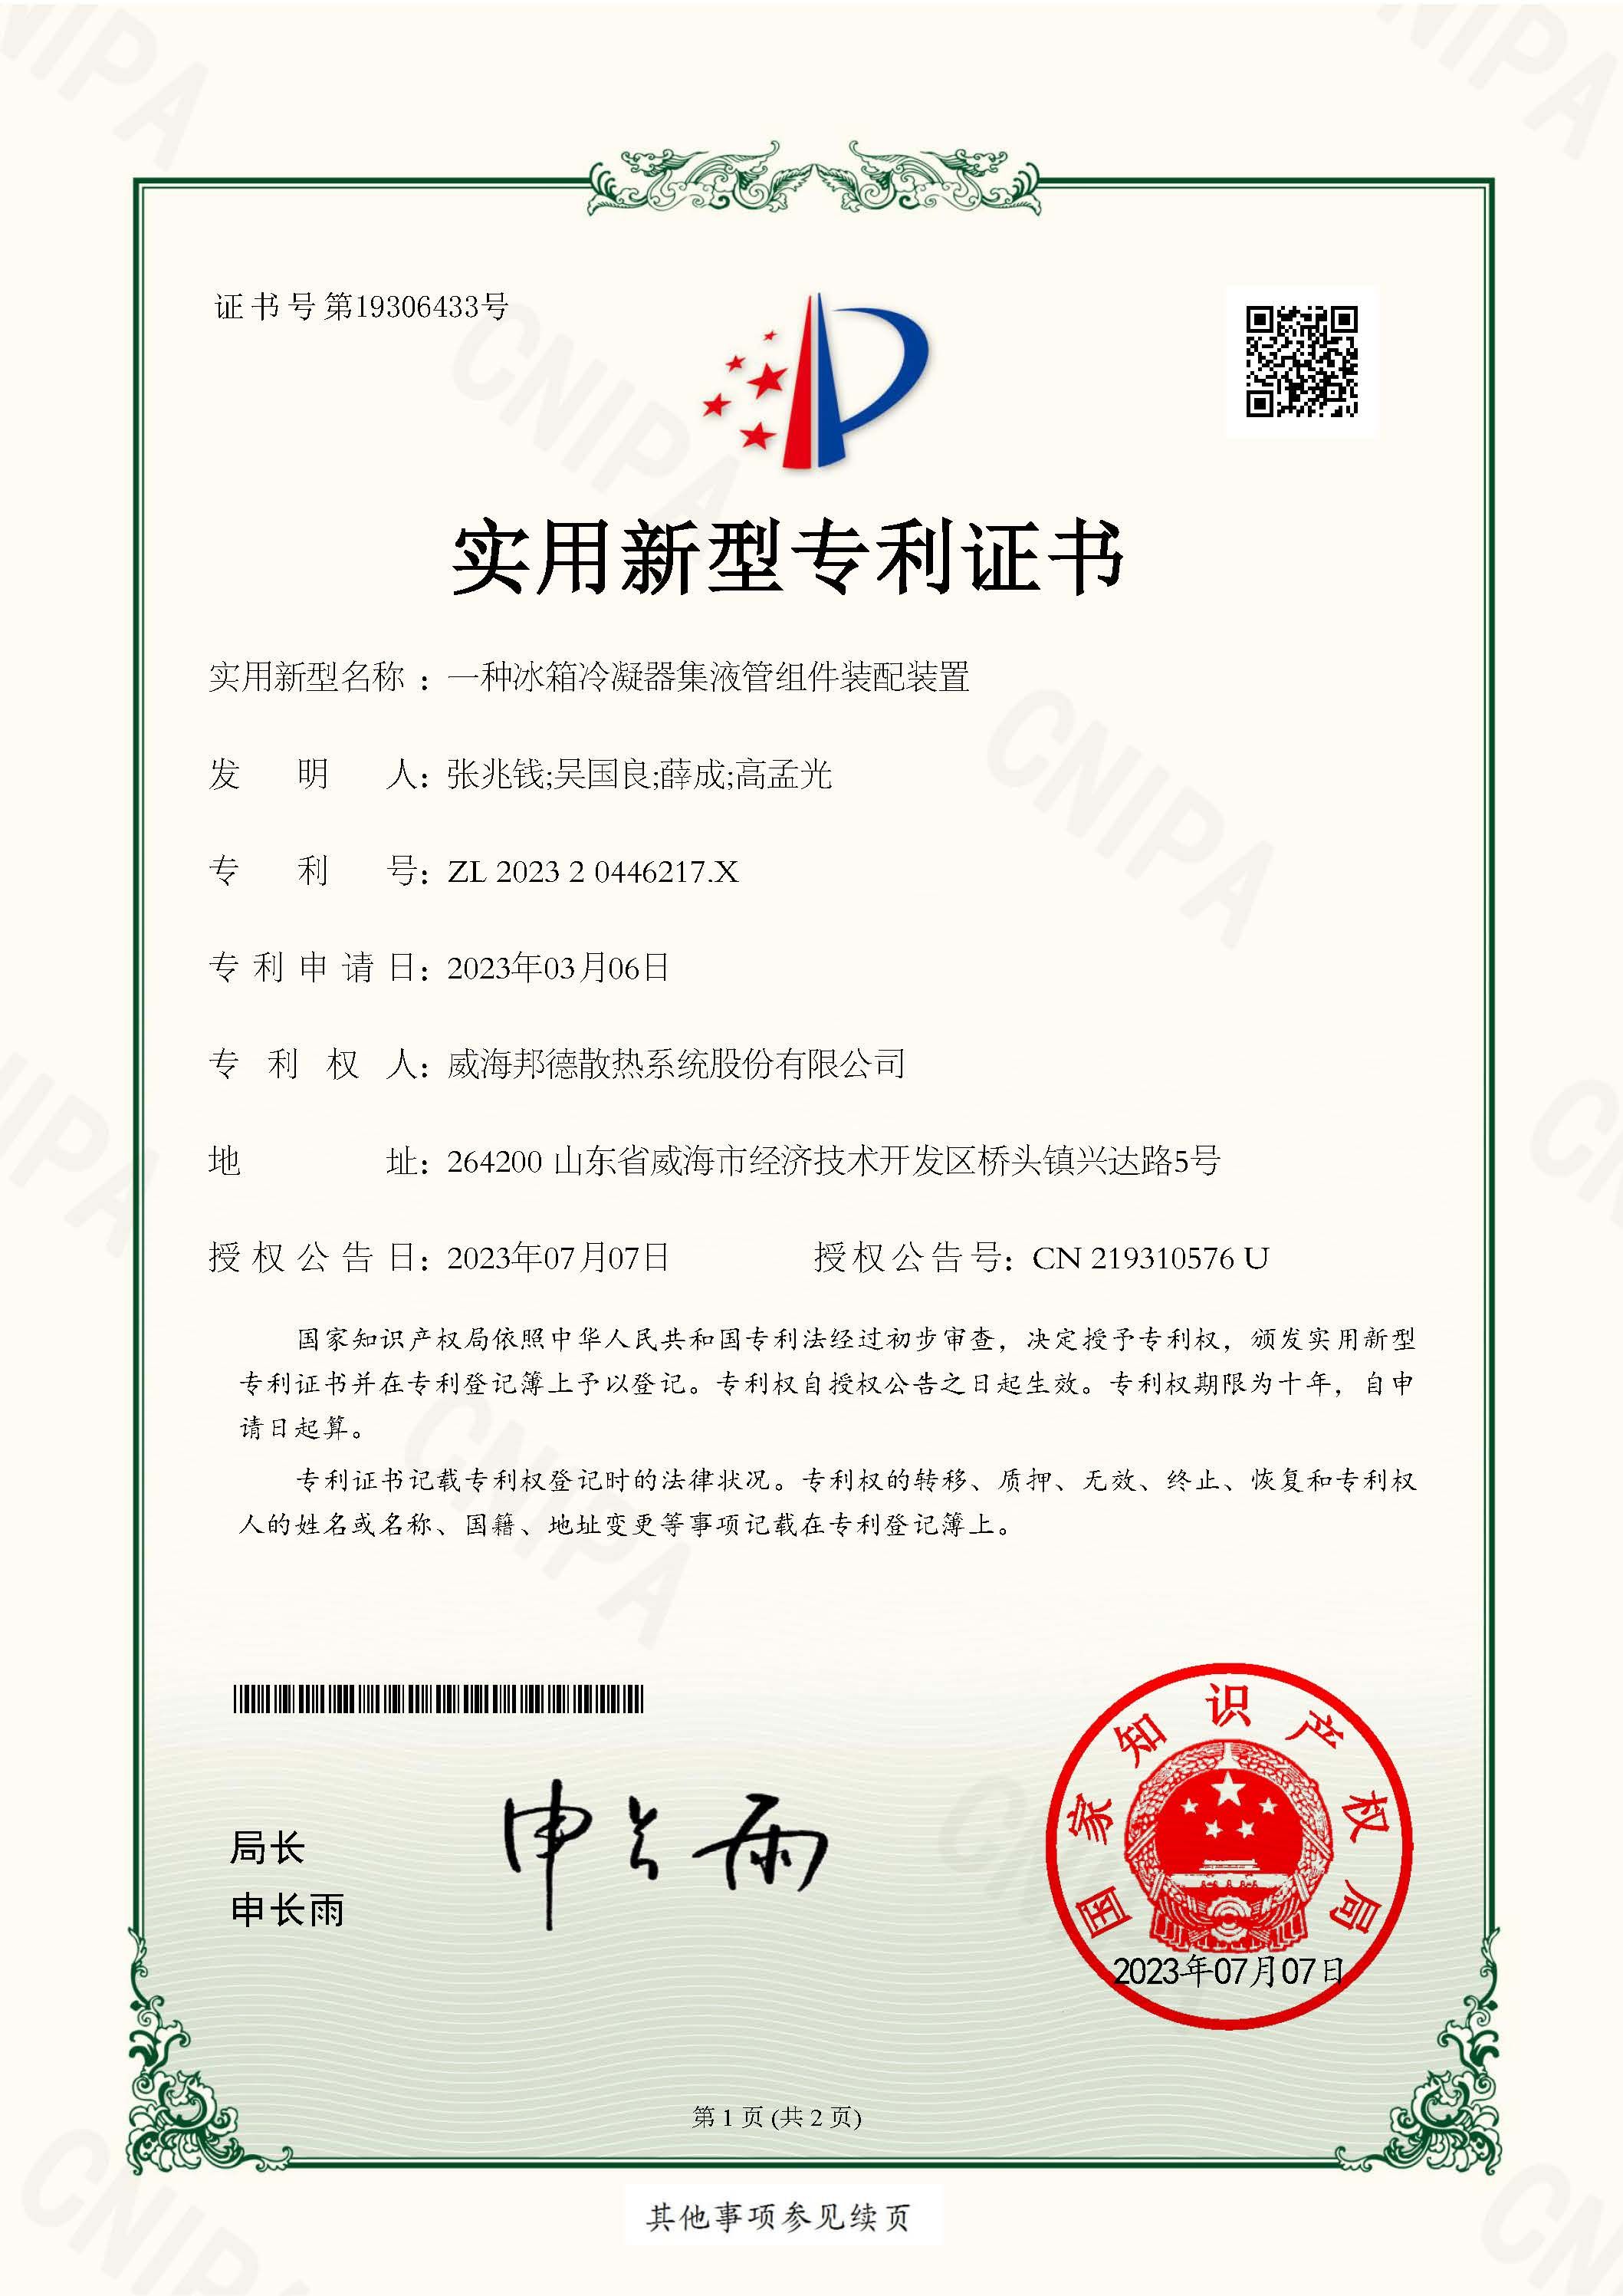 Bangde Company obtained the pratical new-type patent authorization on July 7th. 2023. Patent name: A refrigerator condenser header pipe ASSY’ assembling equipment